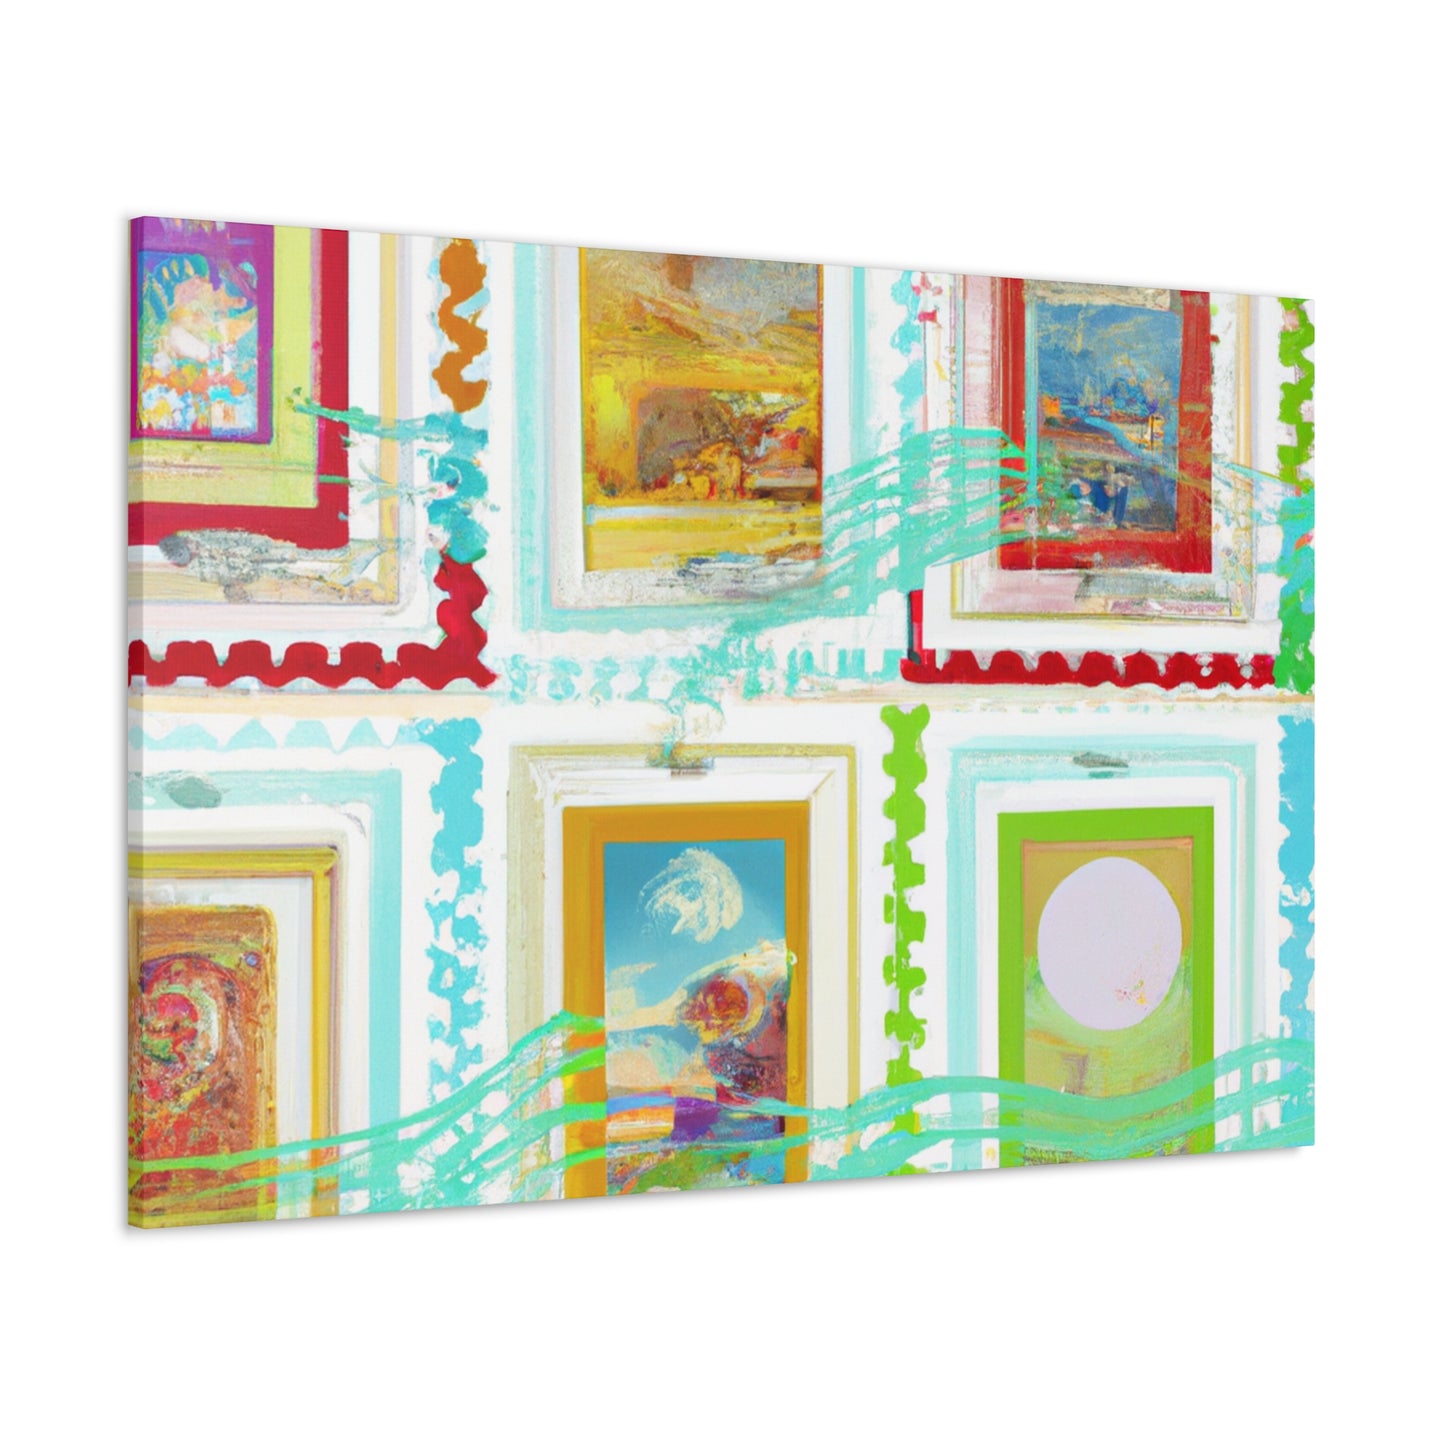 Global Forever Stamps - Postage Stamp Collector Canvas Wall Art